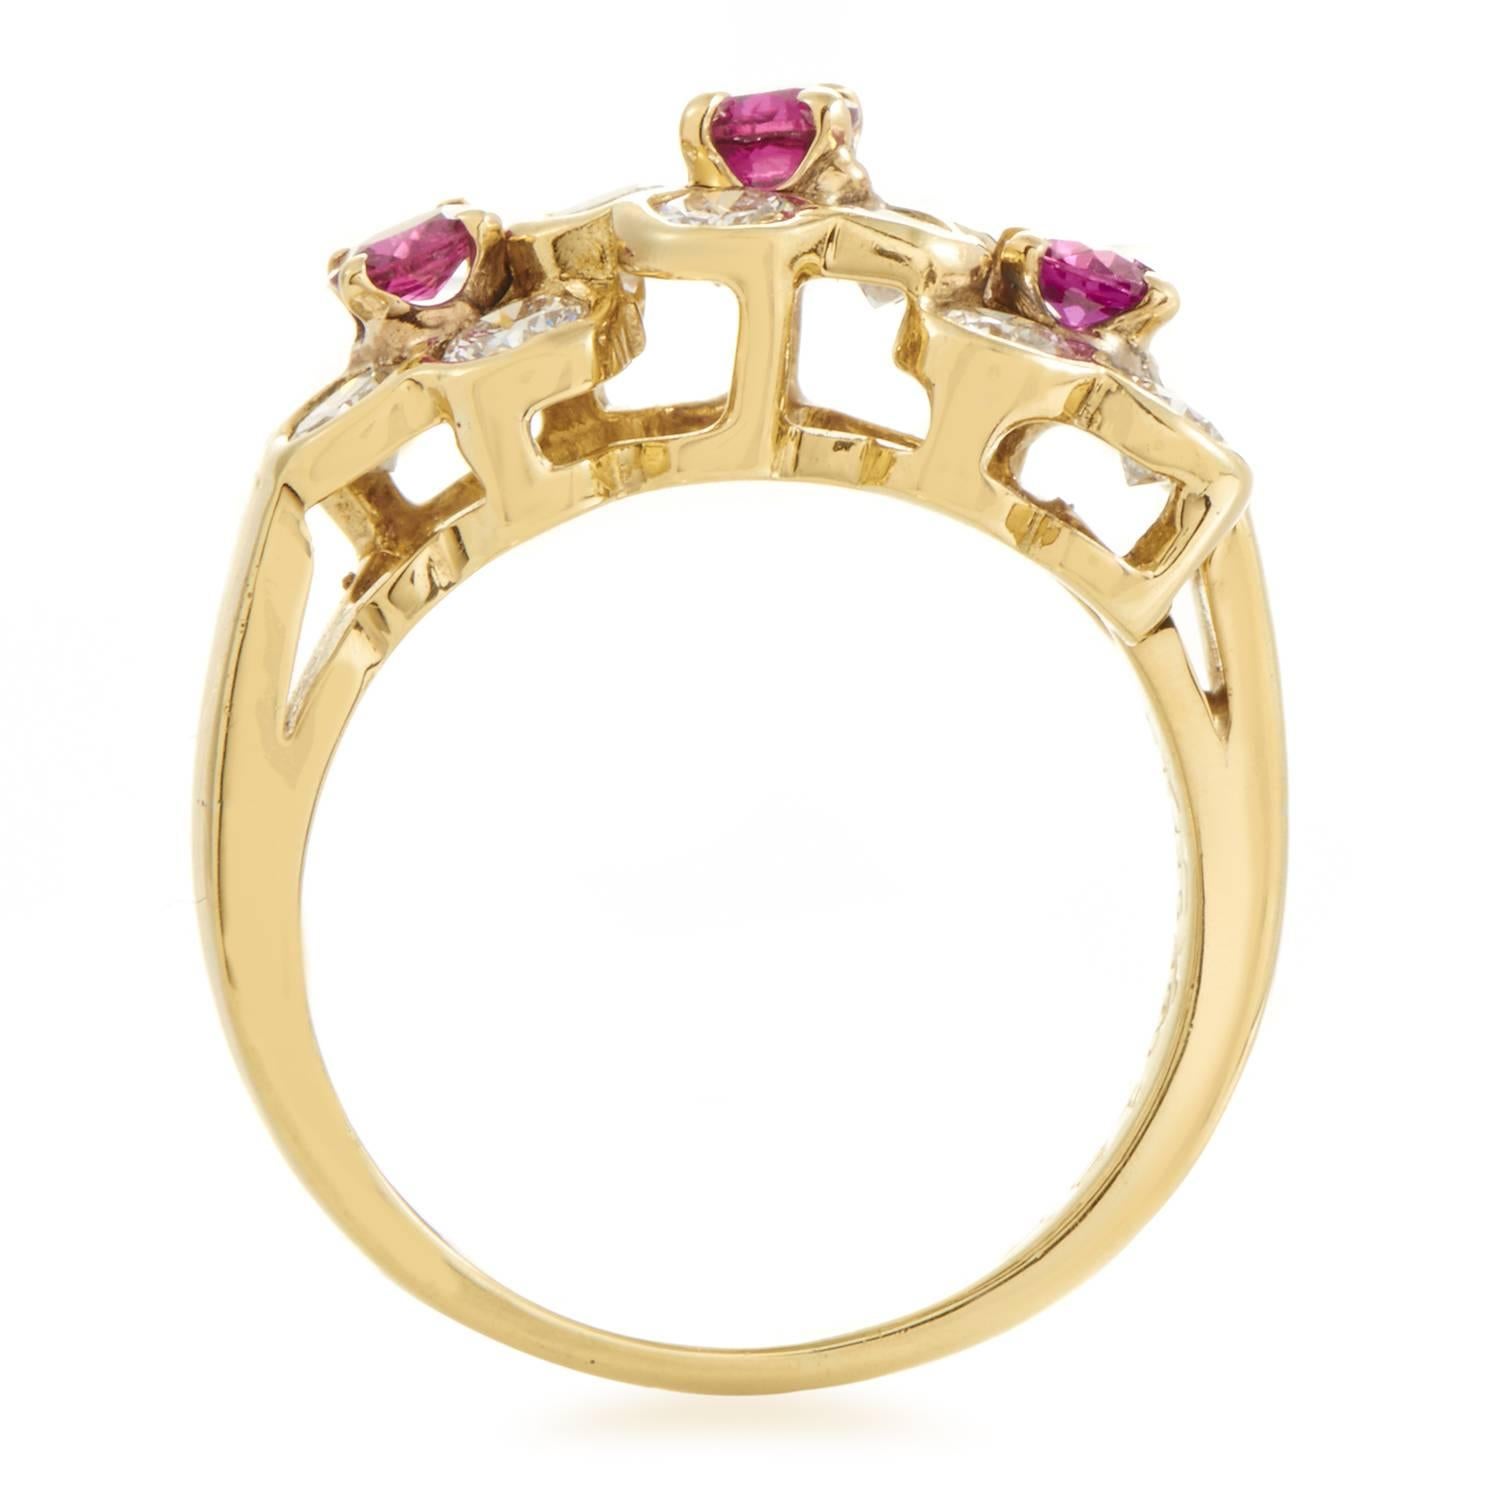 A precious blend of romantic rubies totaling 0.50ct and resplendent diamonds amounting to 0.70ct is arranged in a seemingly chaotic manner in this astonishing ring from Van Cleef & Arpels made of enchanting 18K yellow gold.
Ring Size: 4.25 (47